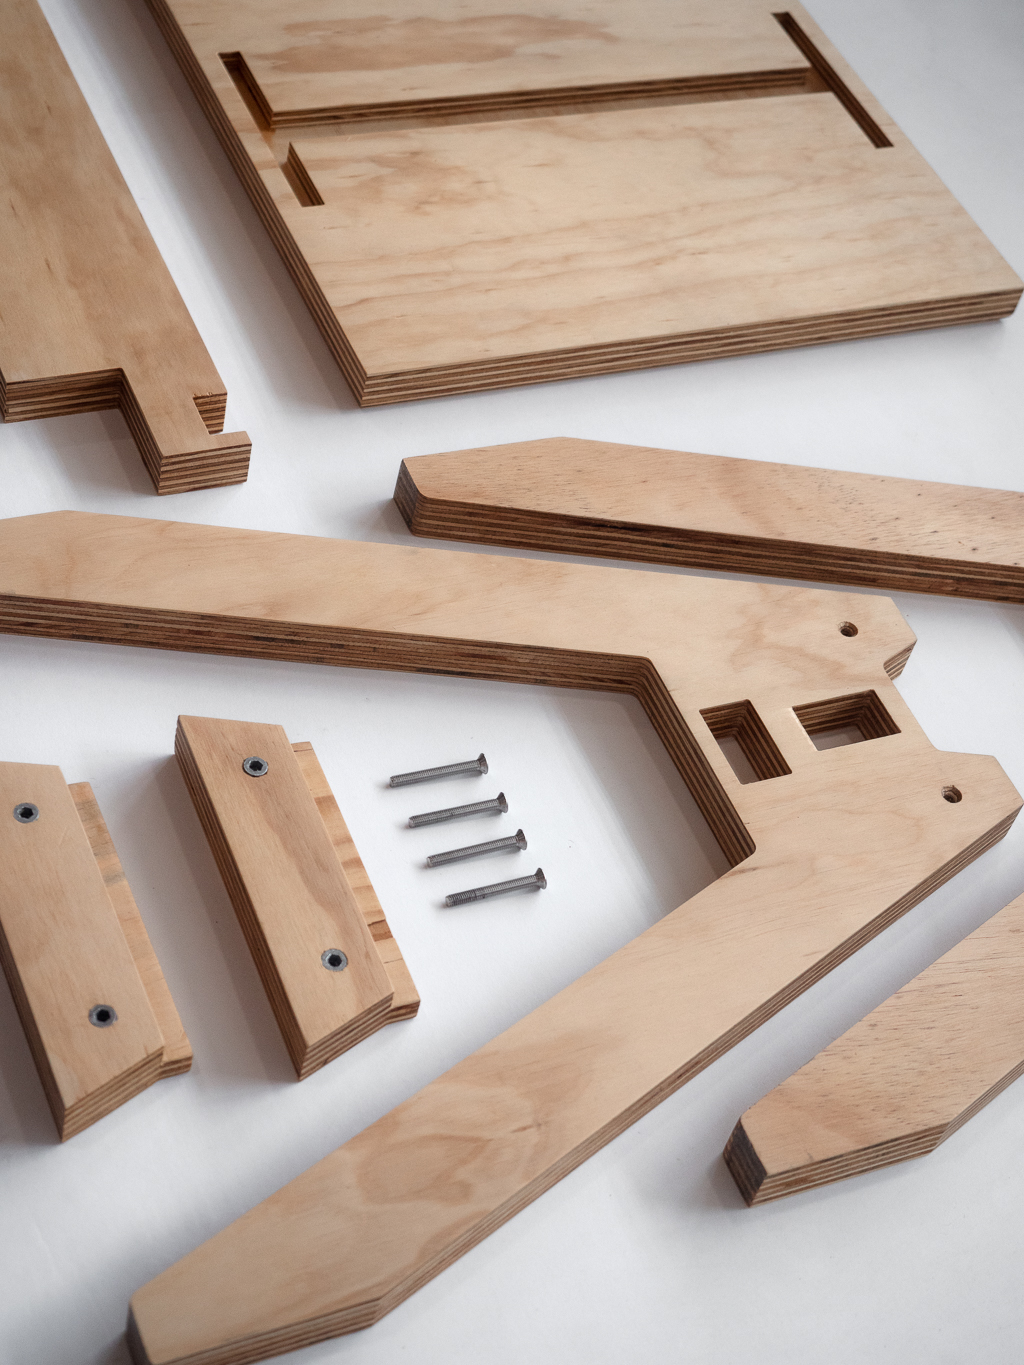 A disassembled wooden pavilion stool